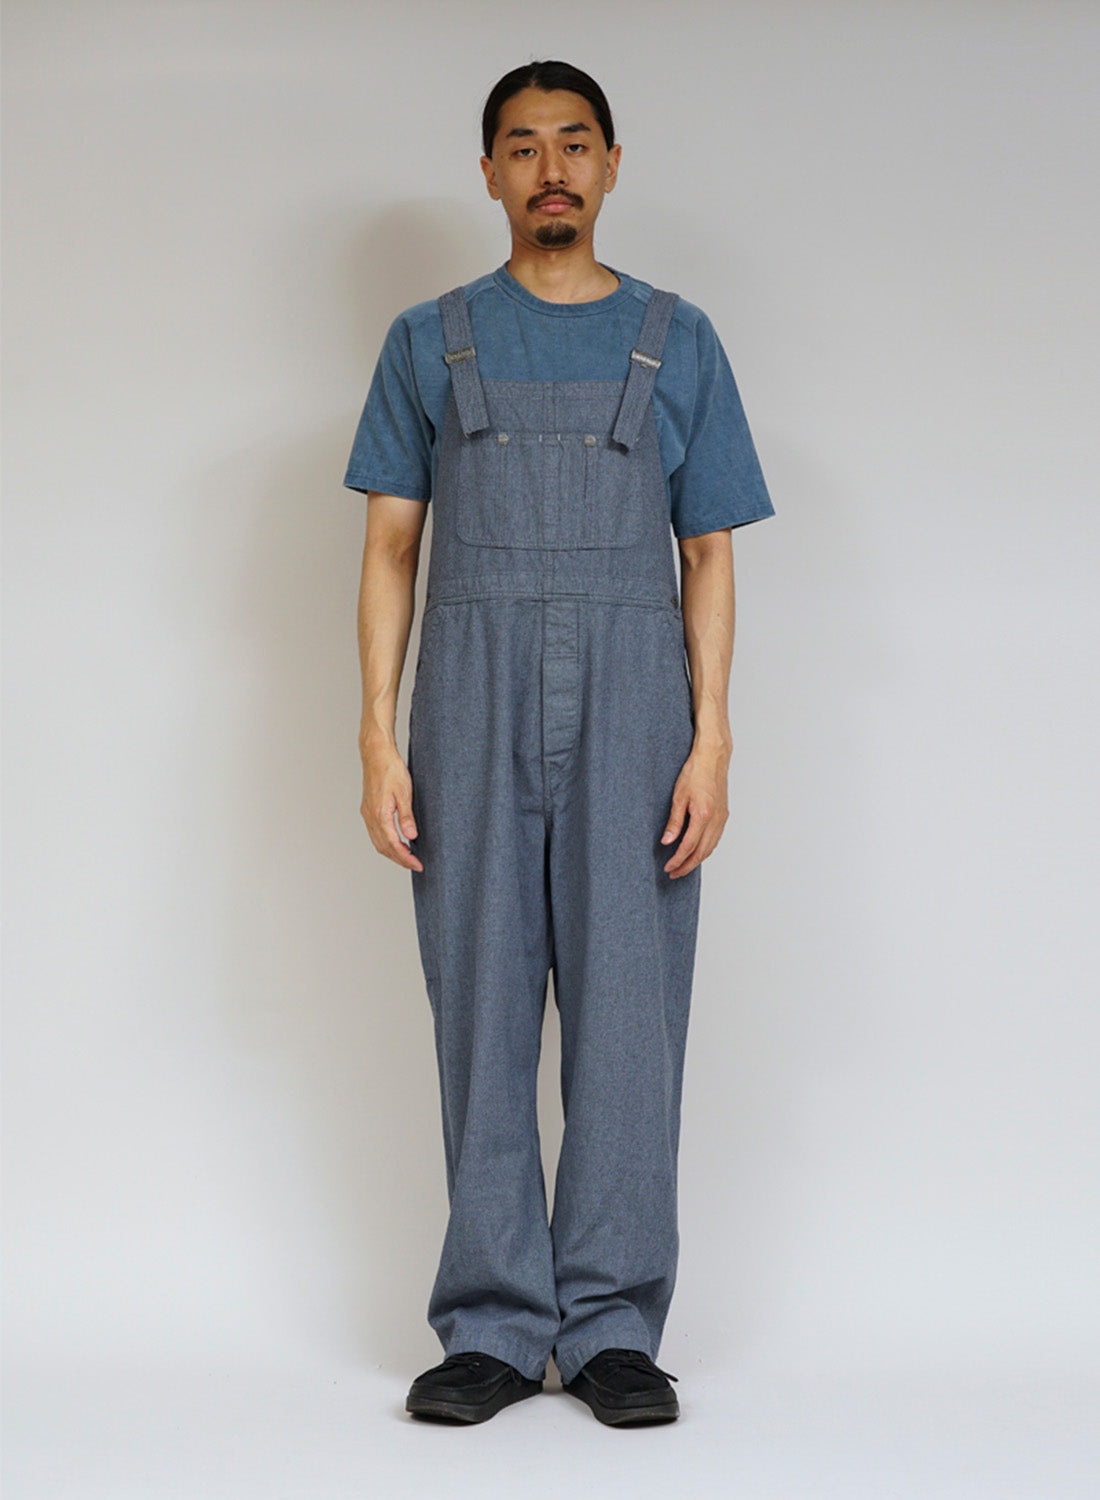 New Dungaree Broken Twill in Washed Blue - 2